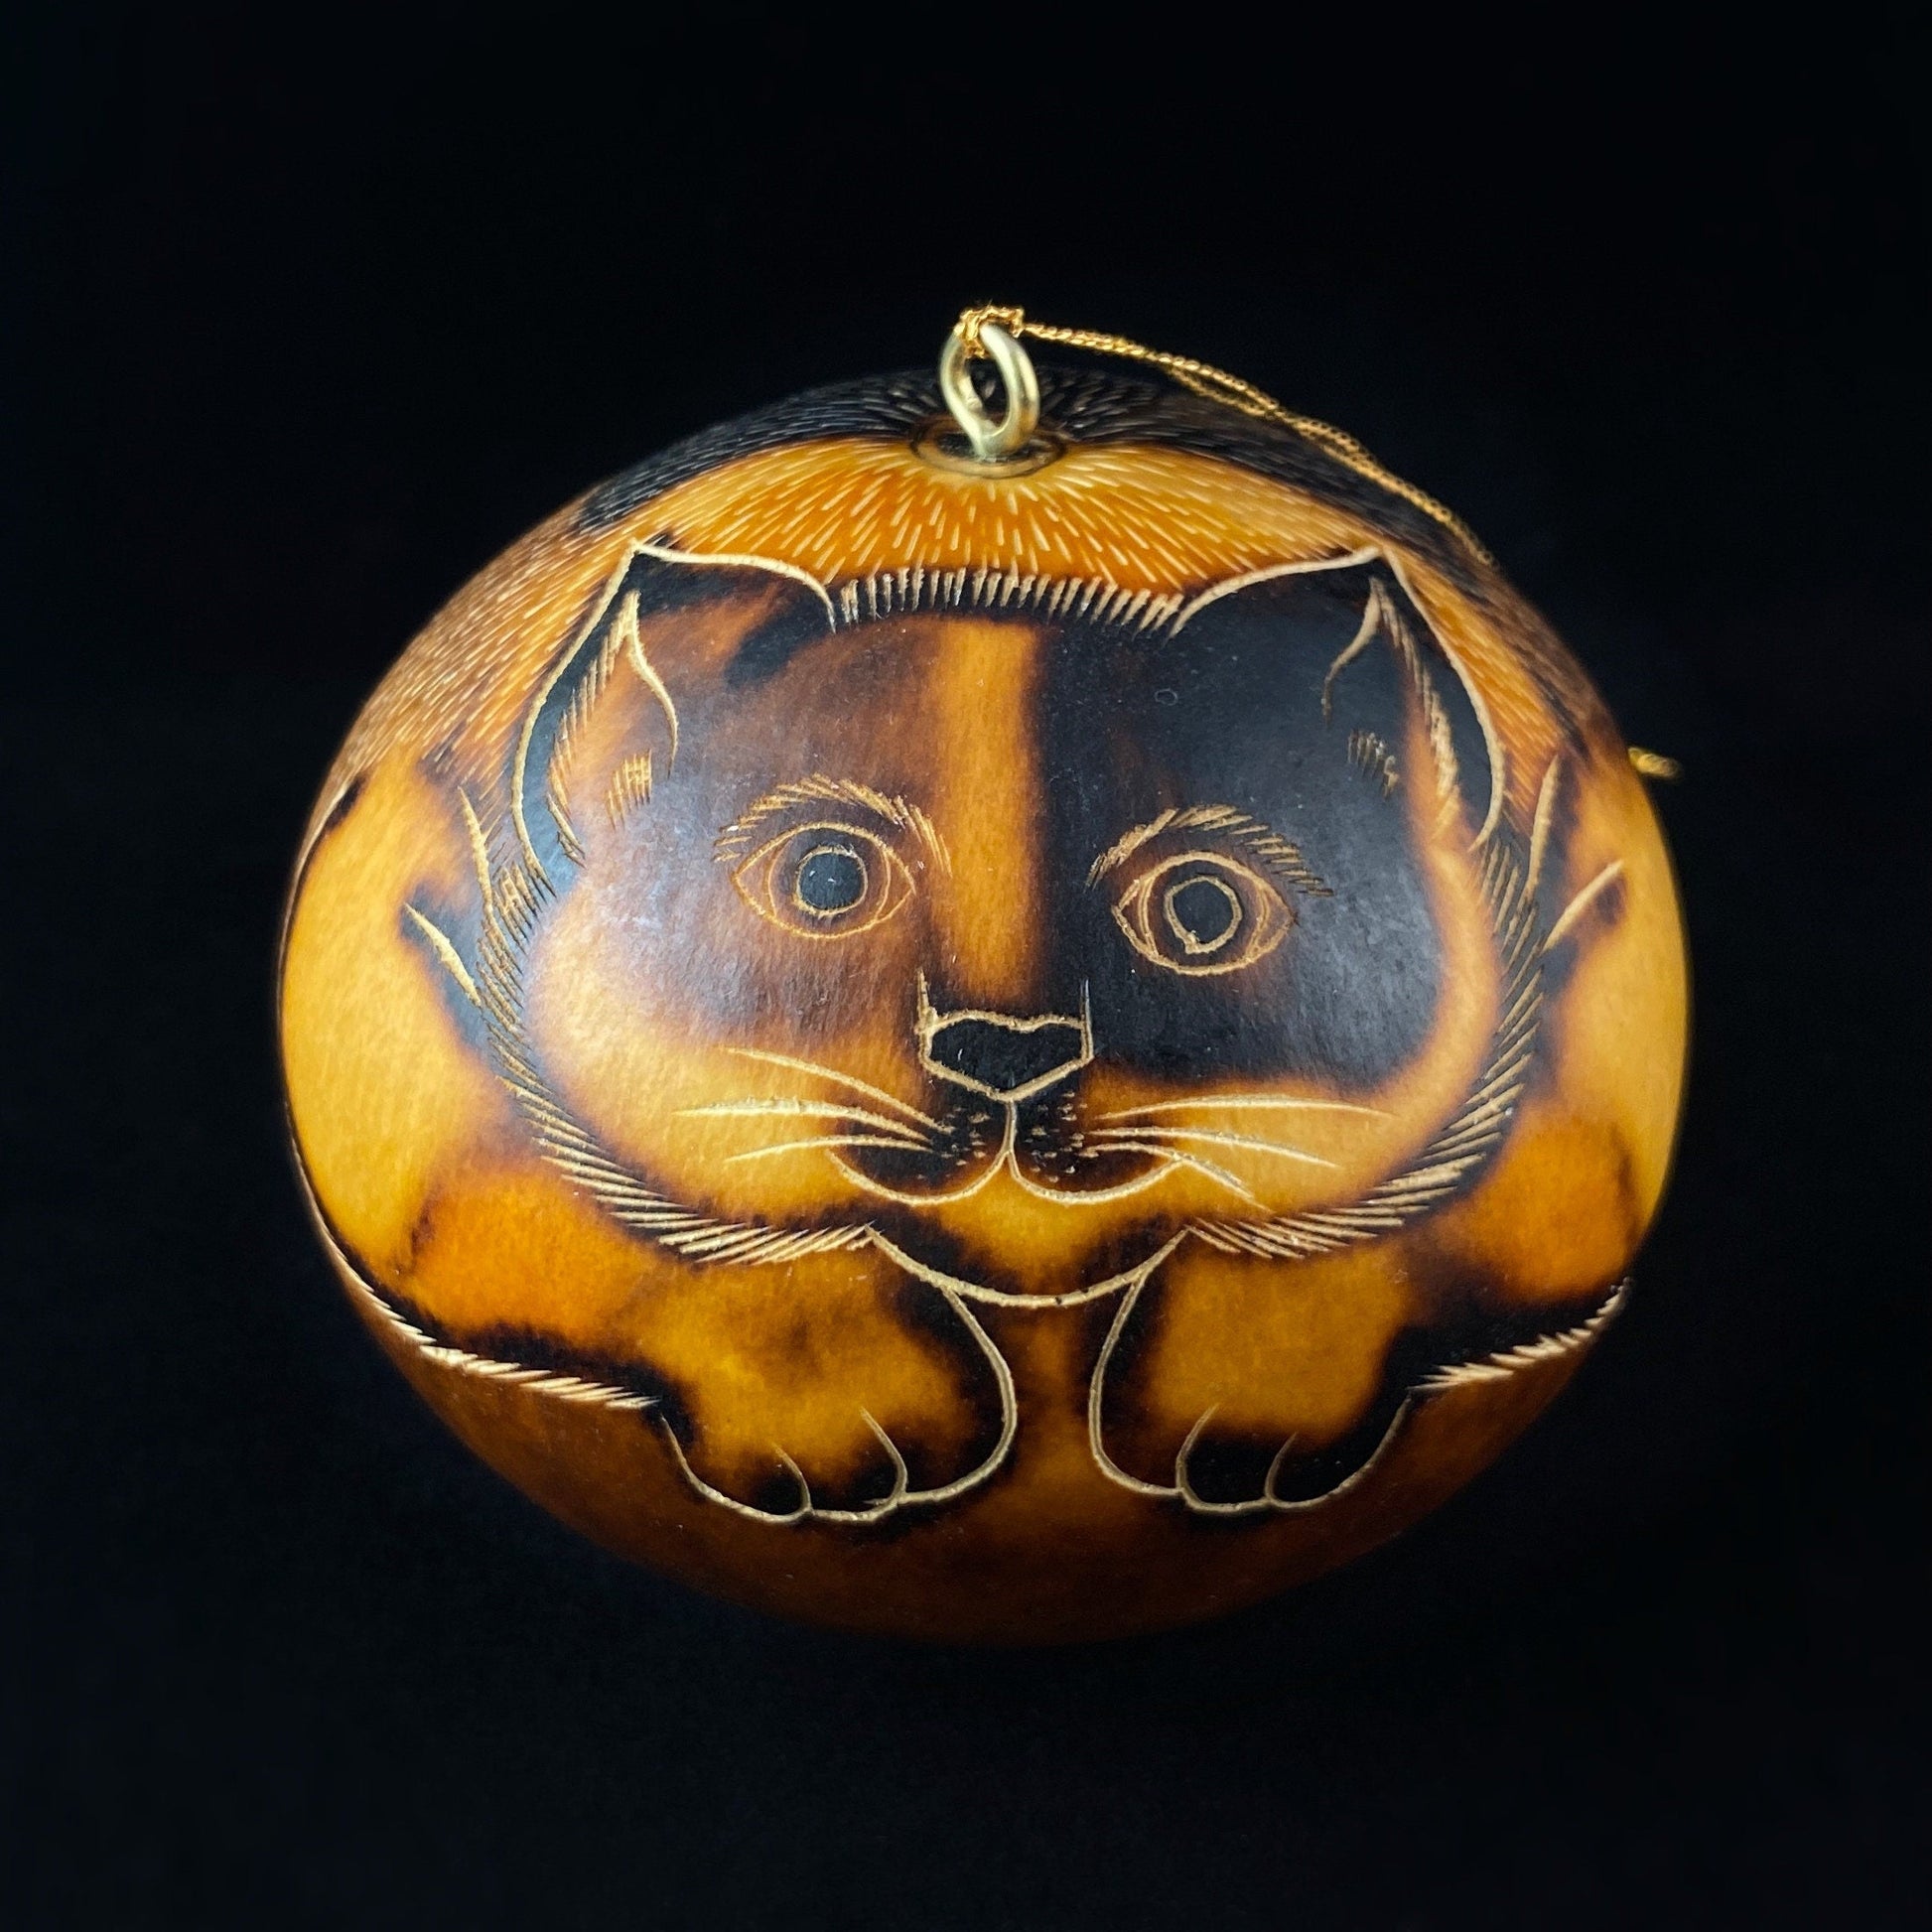 Decorative Brown Kitten Ornament/Maraca - Hand-Carved and Hand Painted Peruvian Gourd